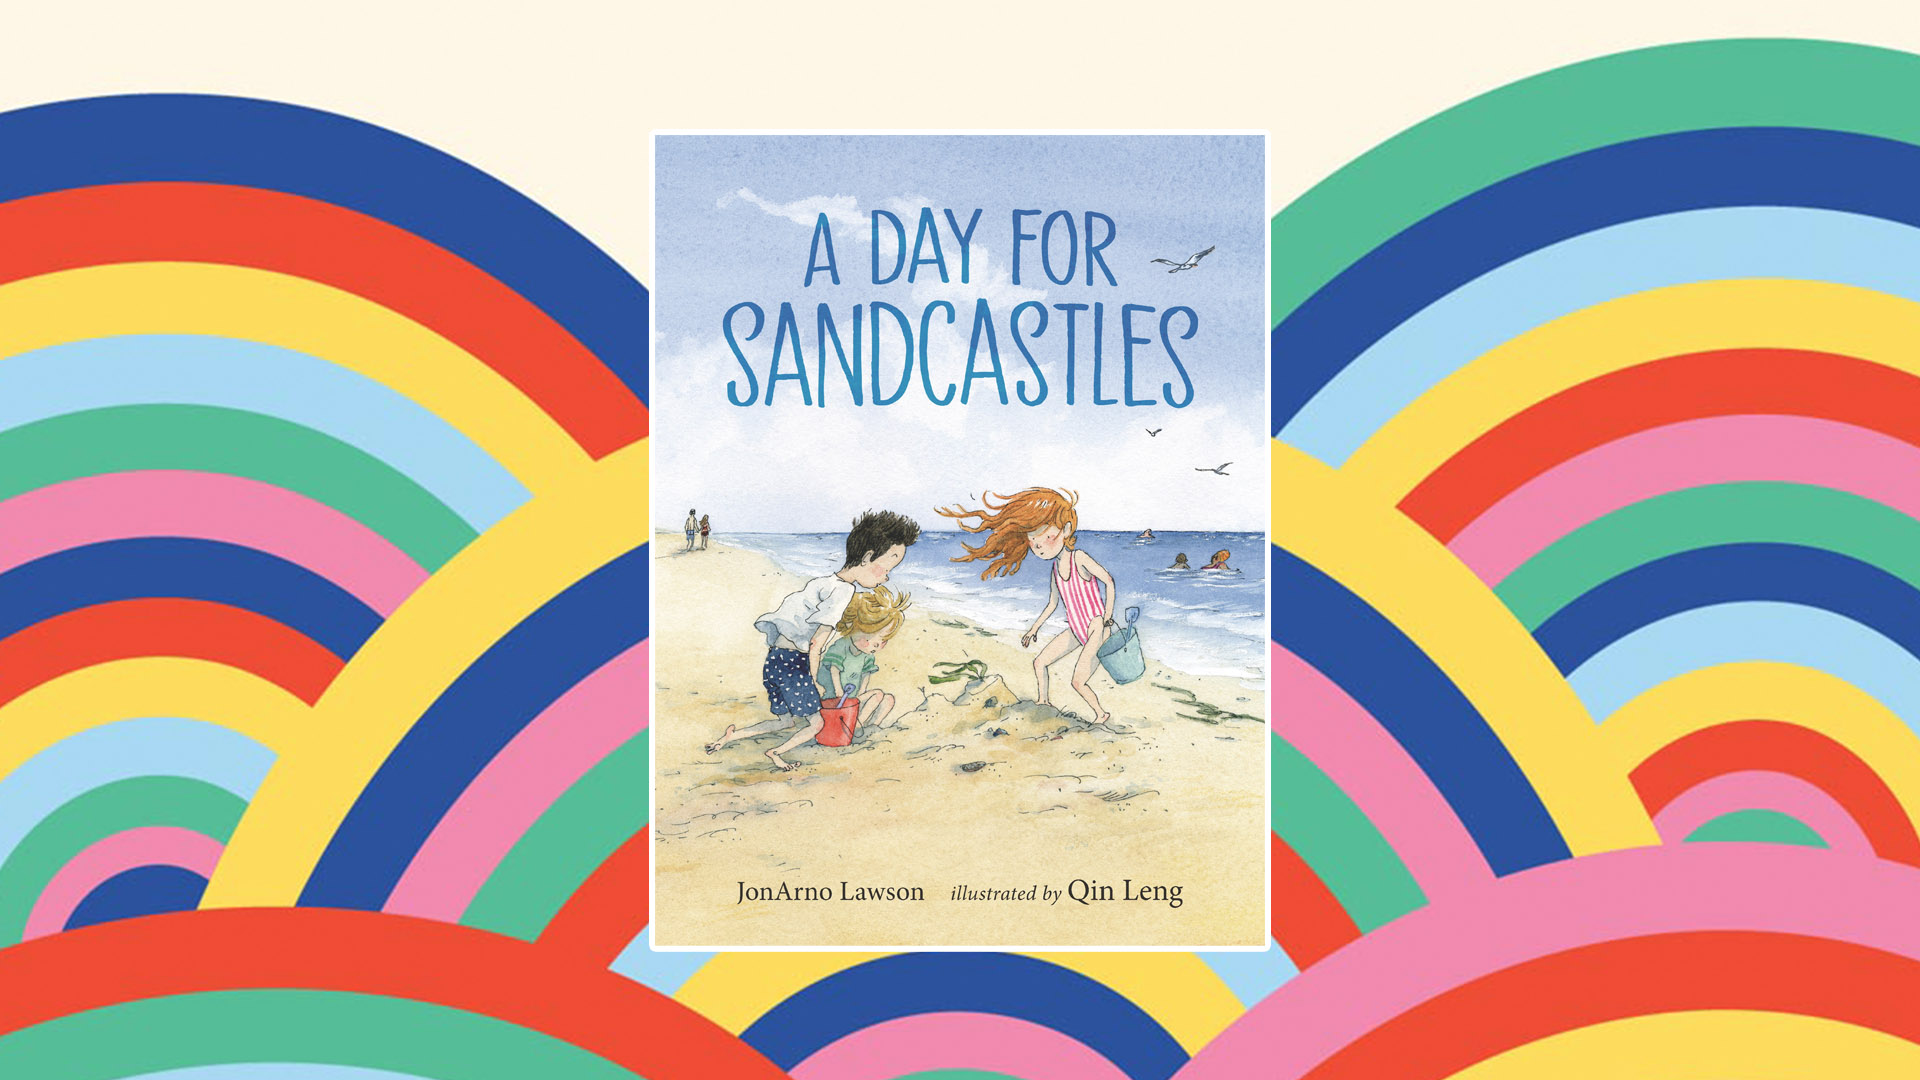 A Day for Sandcastles book cover